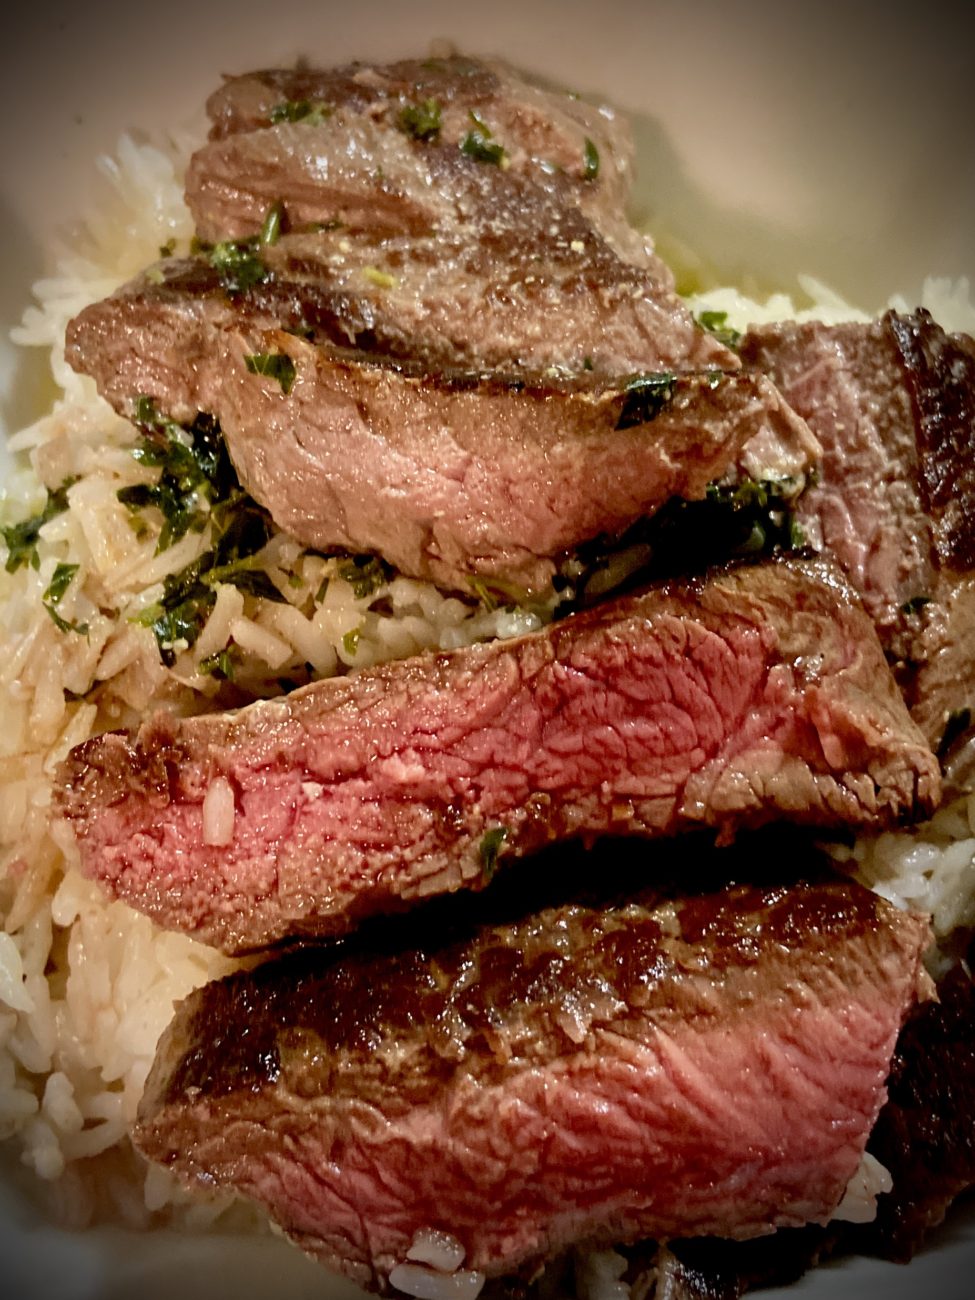 Juicy Beef Sirloin Tip Steaks with Rice and low-fat Beurre Blanc White Sauce